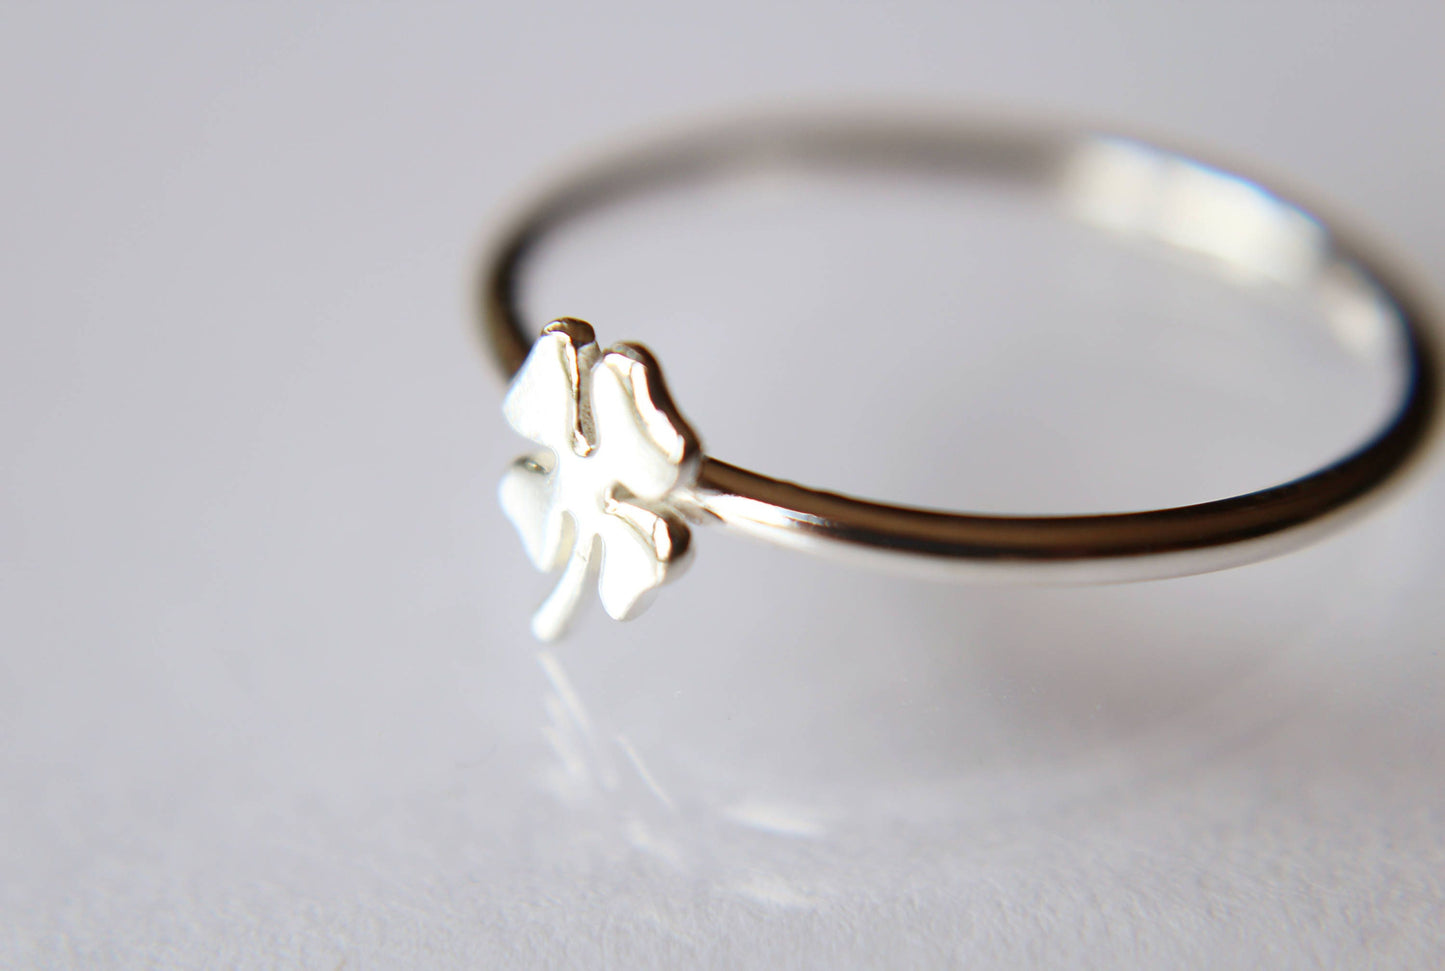 Lucky Ring, Clover Ring, Shamrock Ring, Simple Four Leaf Clover Ring, Gift, March, St. Patricks Day, Lucky, Clover, Minimalist, Gift